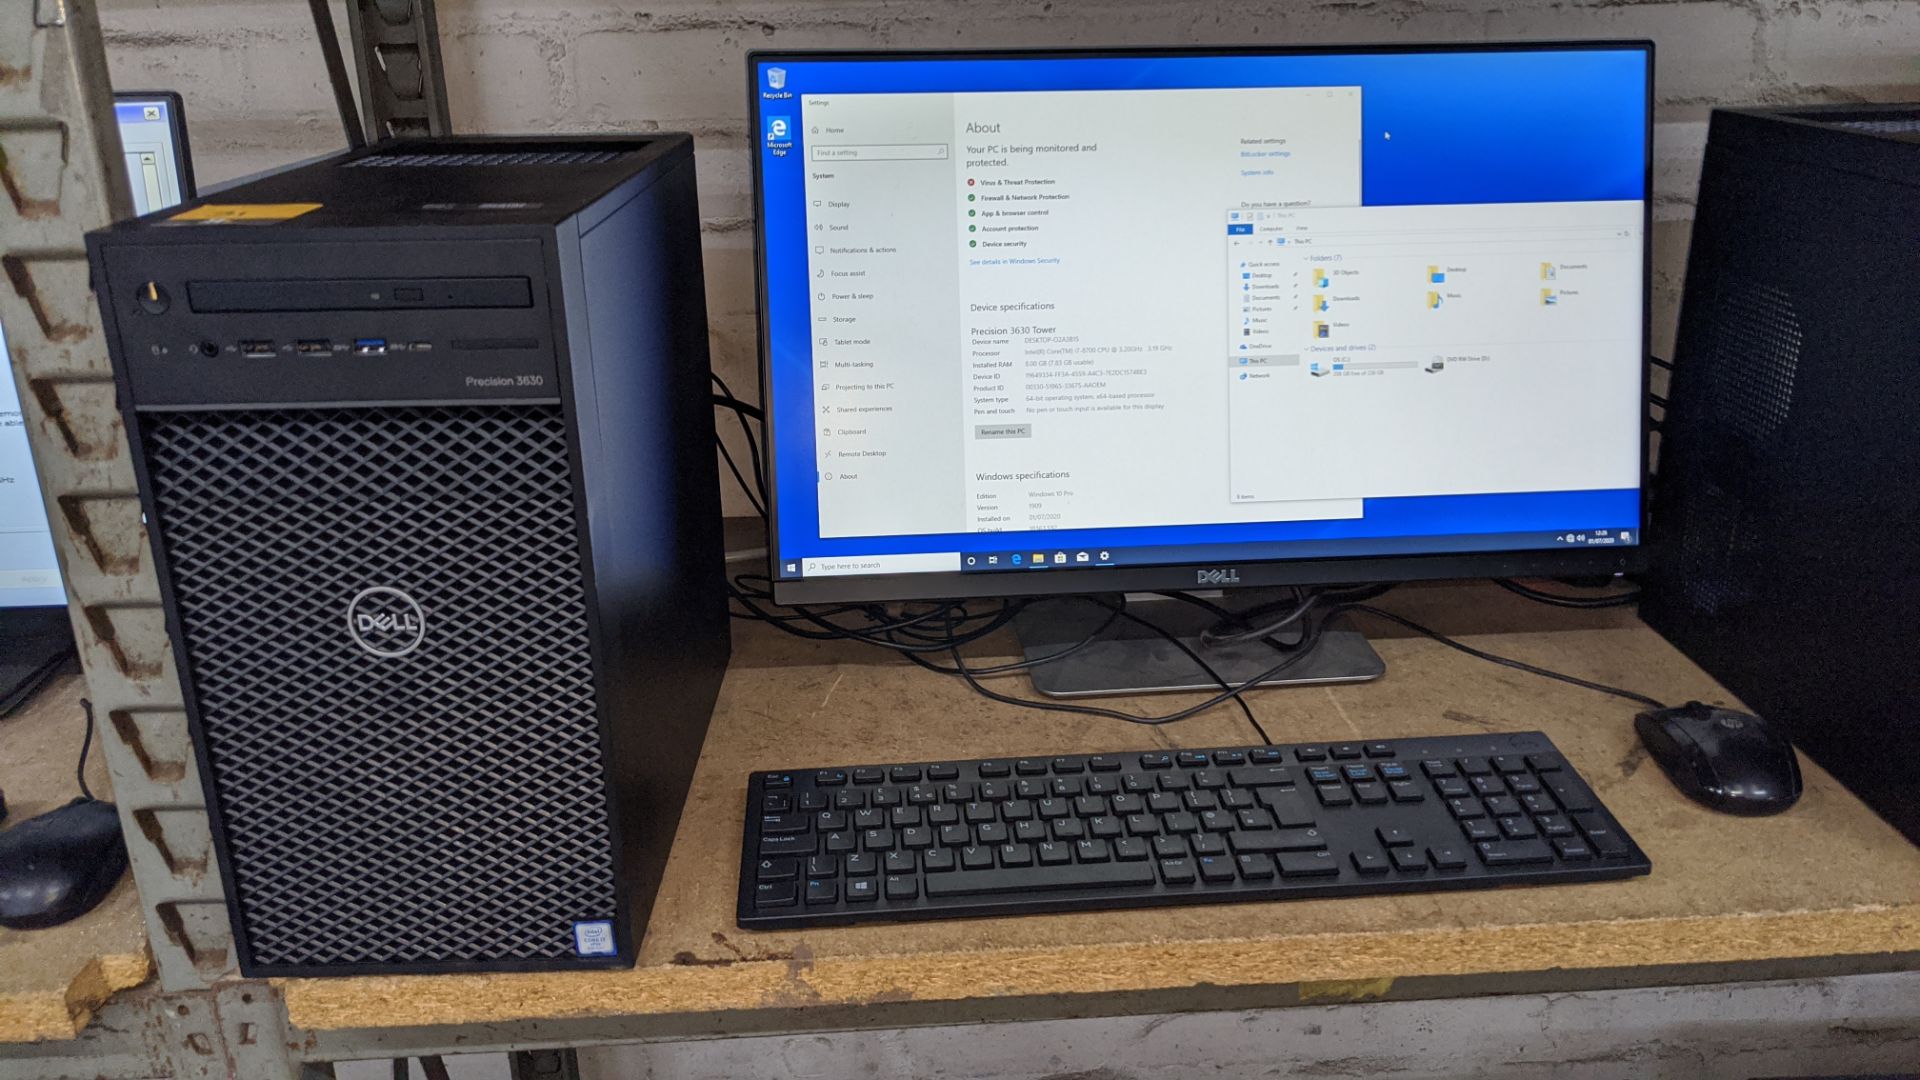 Dell Precision tower 3630 computer with Intel Core i7-8700 processor, 8Gb RAM, 256Gb SSD etc. includ - Image 2 of 5